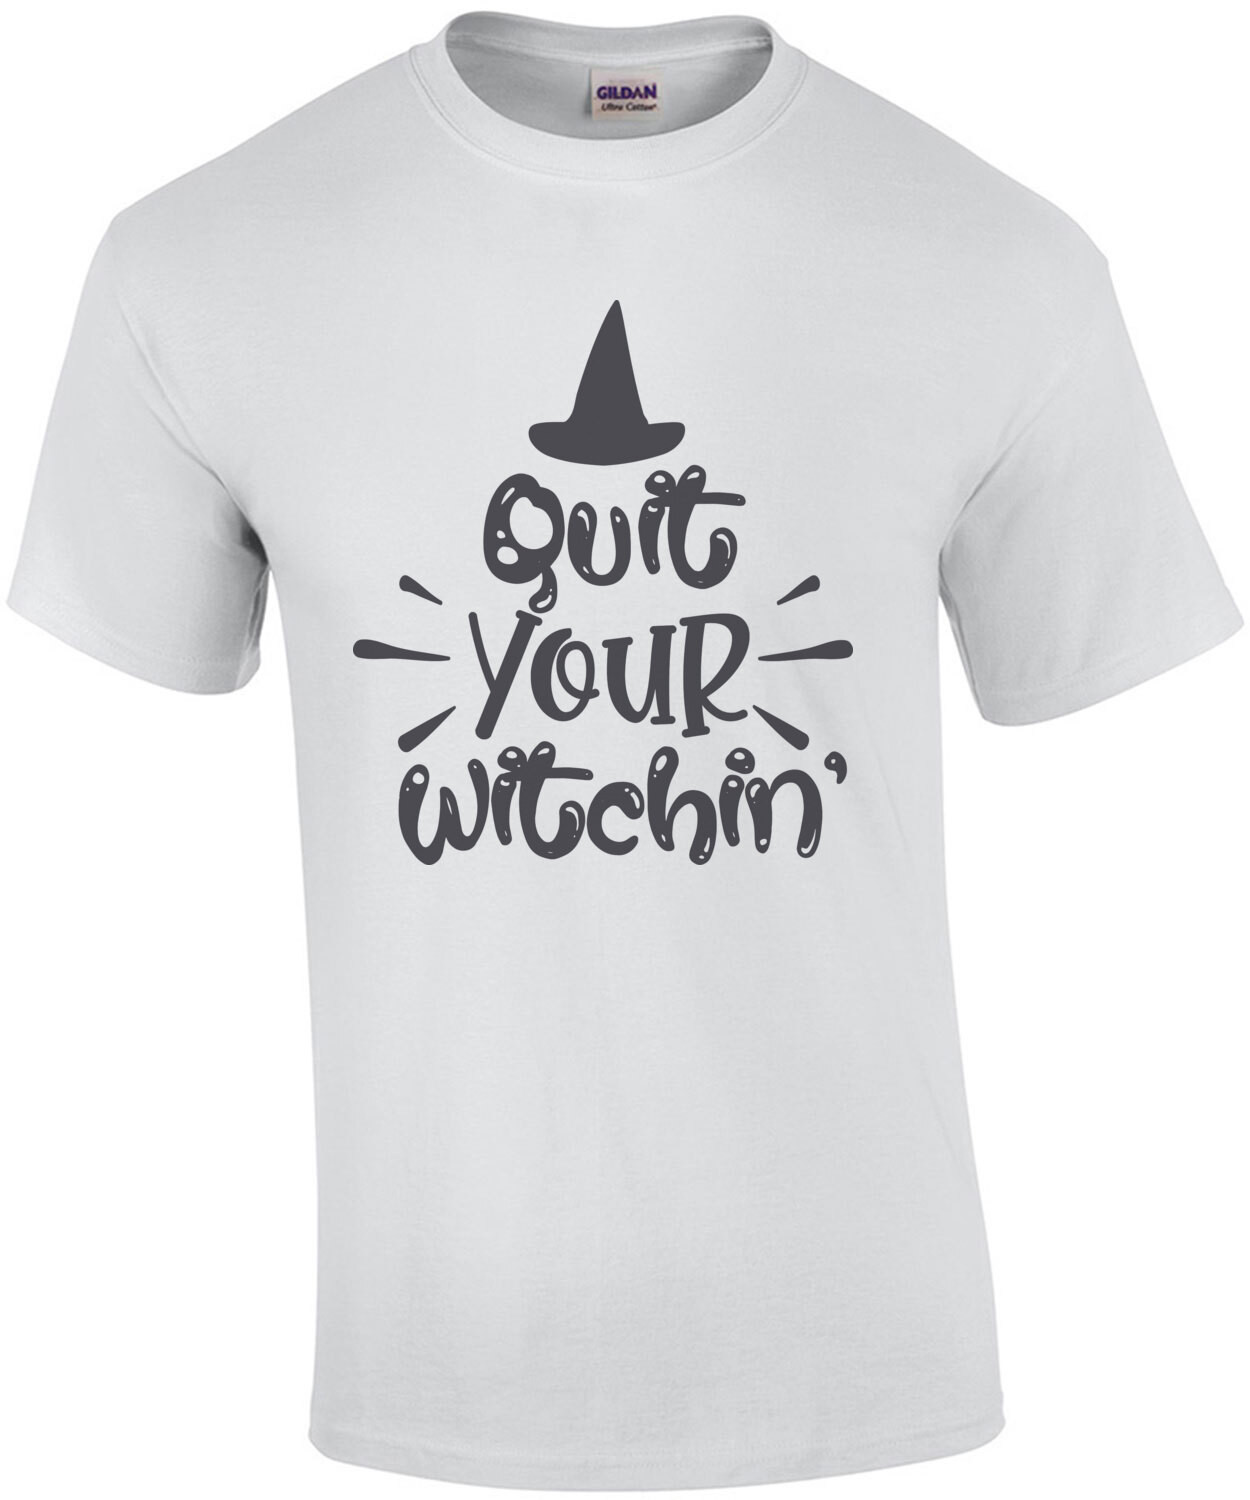 Quit Your Witching - Funny Halloween Tee